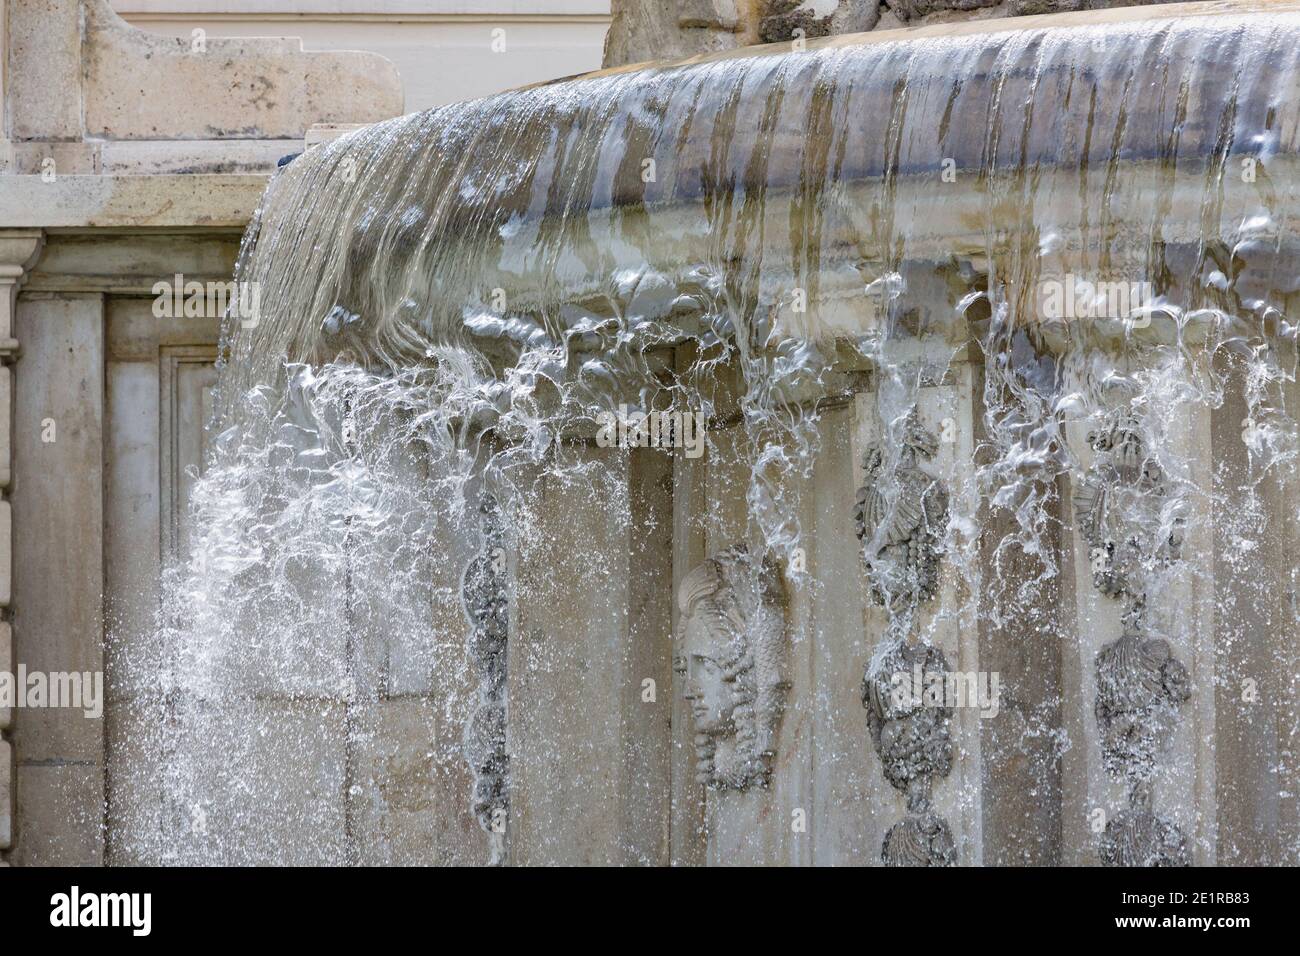 Detail of the large neptune fountain in the Schoenbrunn Palace park in Vienna, Austria. Stock Photo